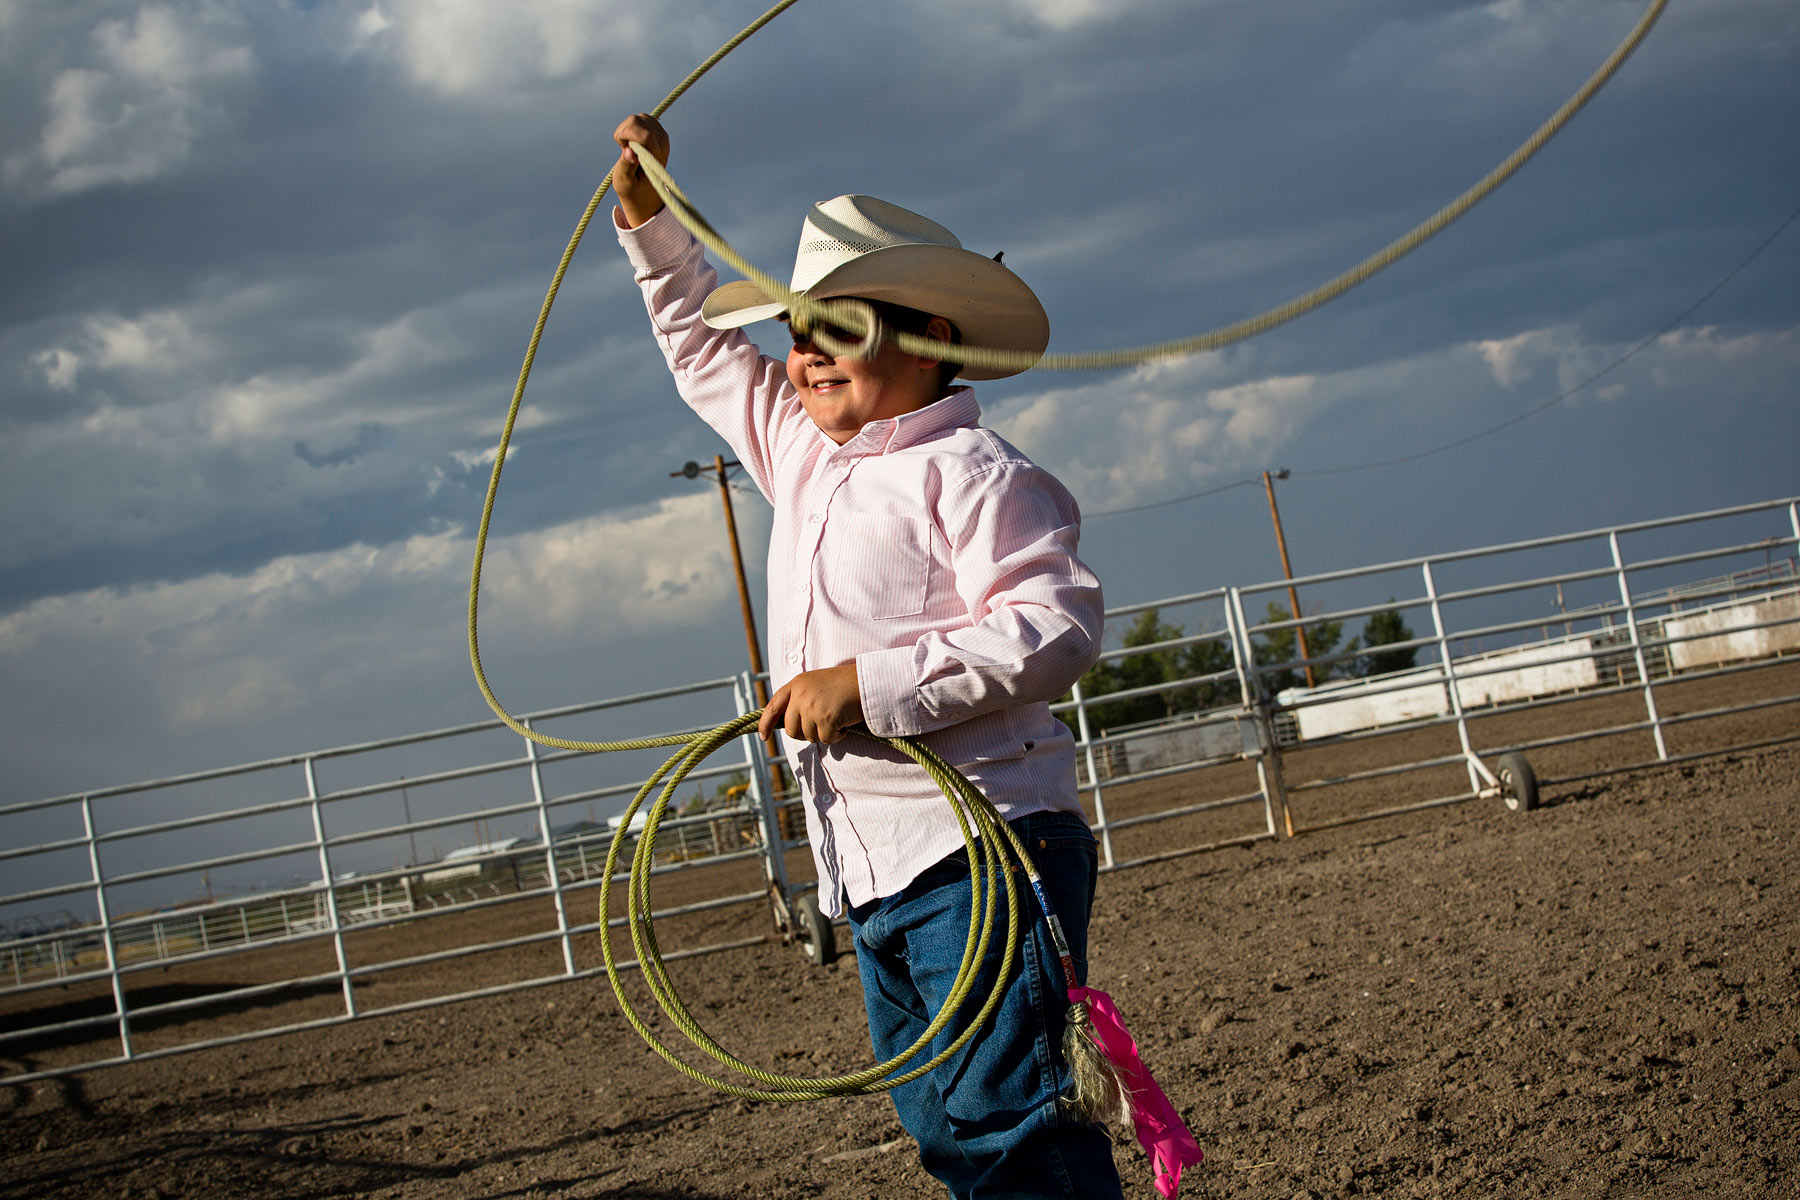 Try Vaile warms up for the dummy roping competition.